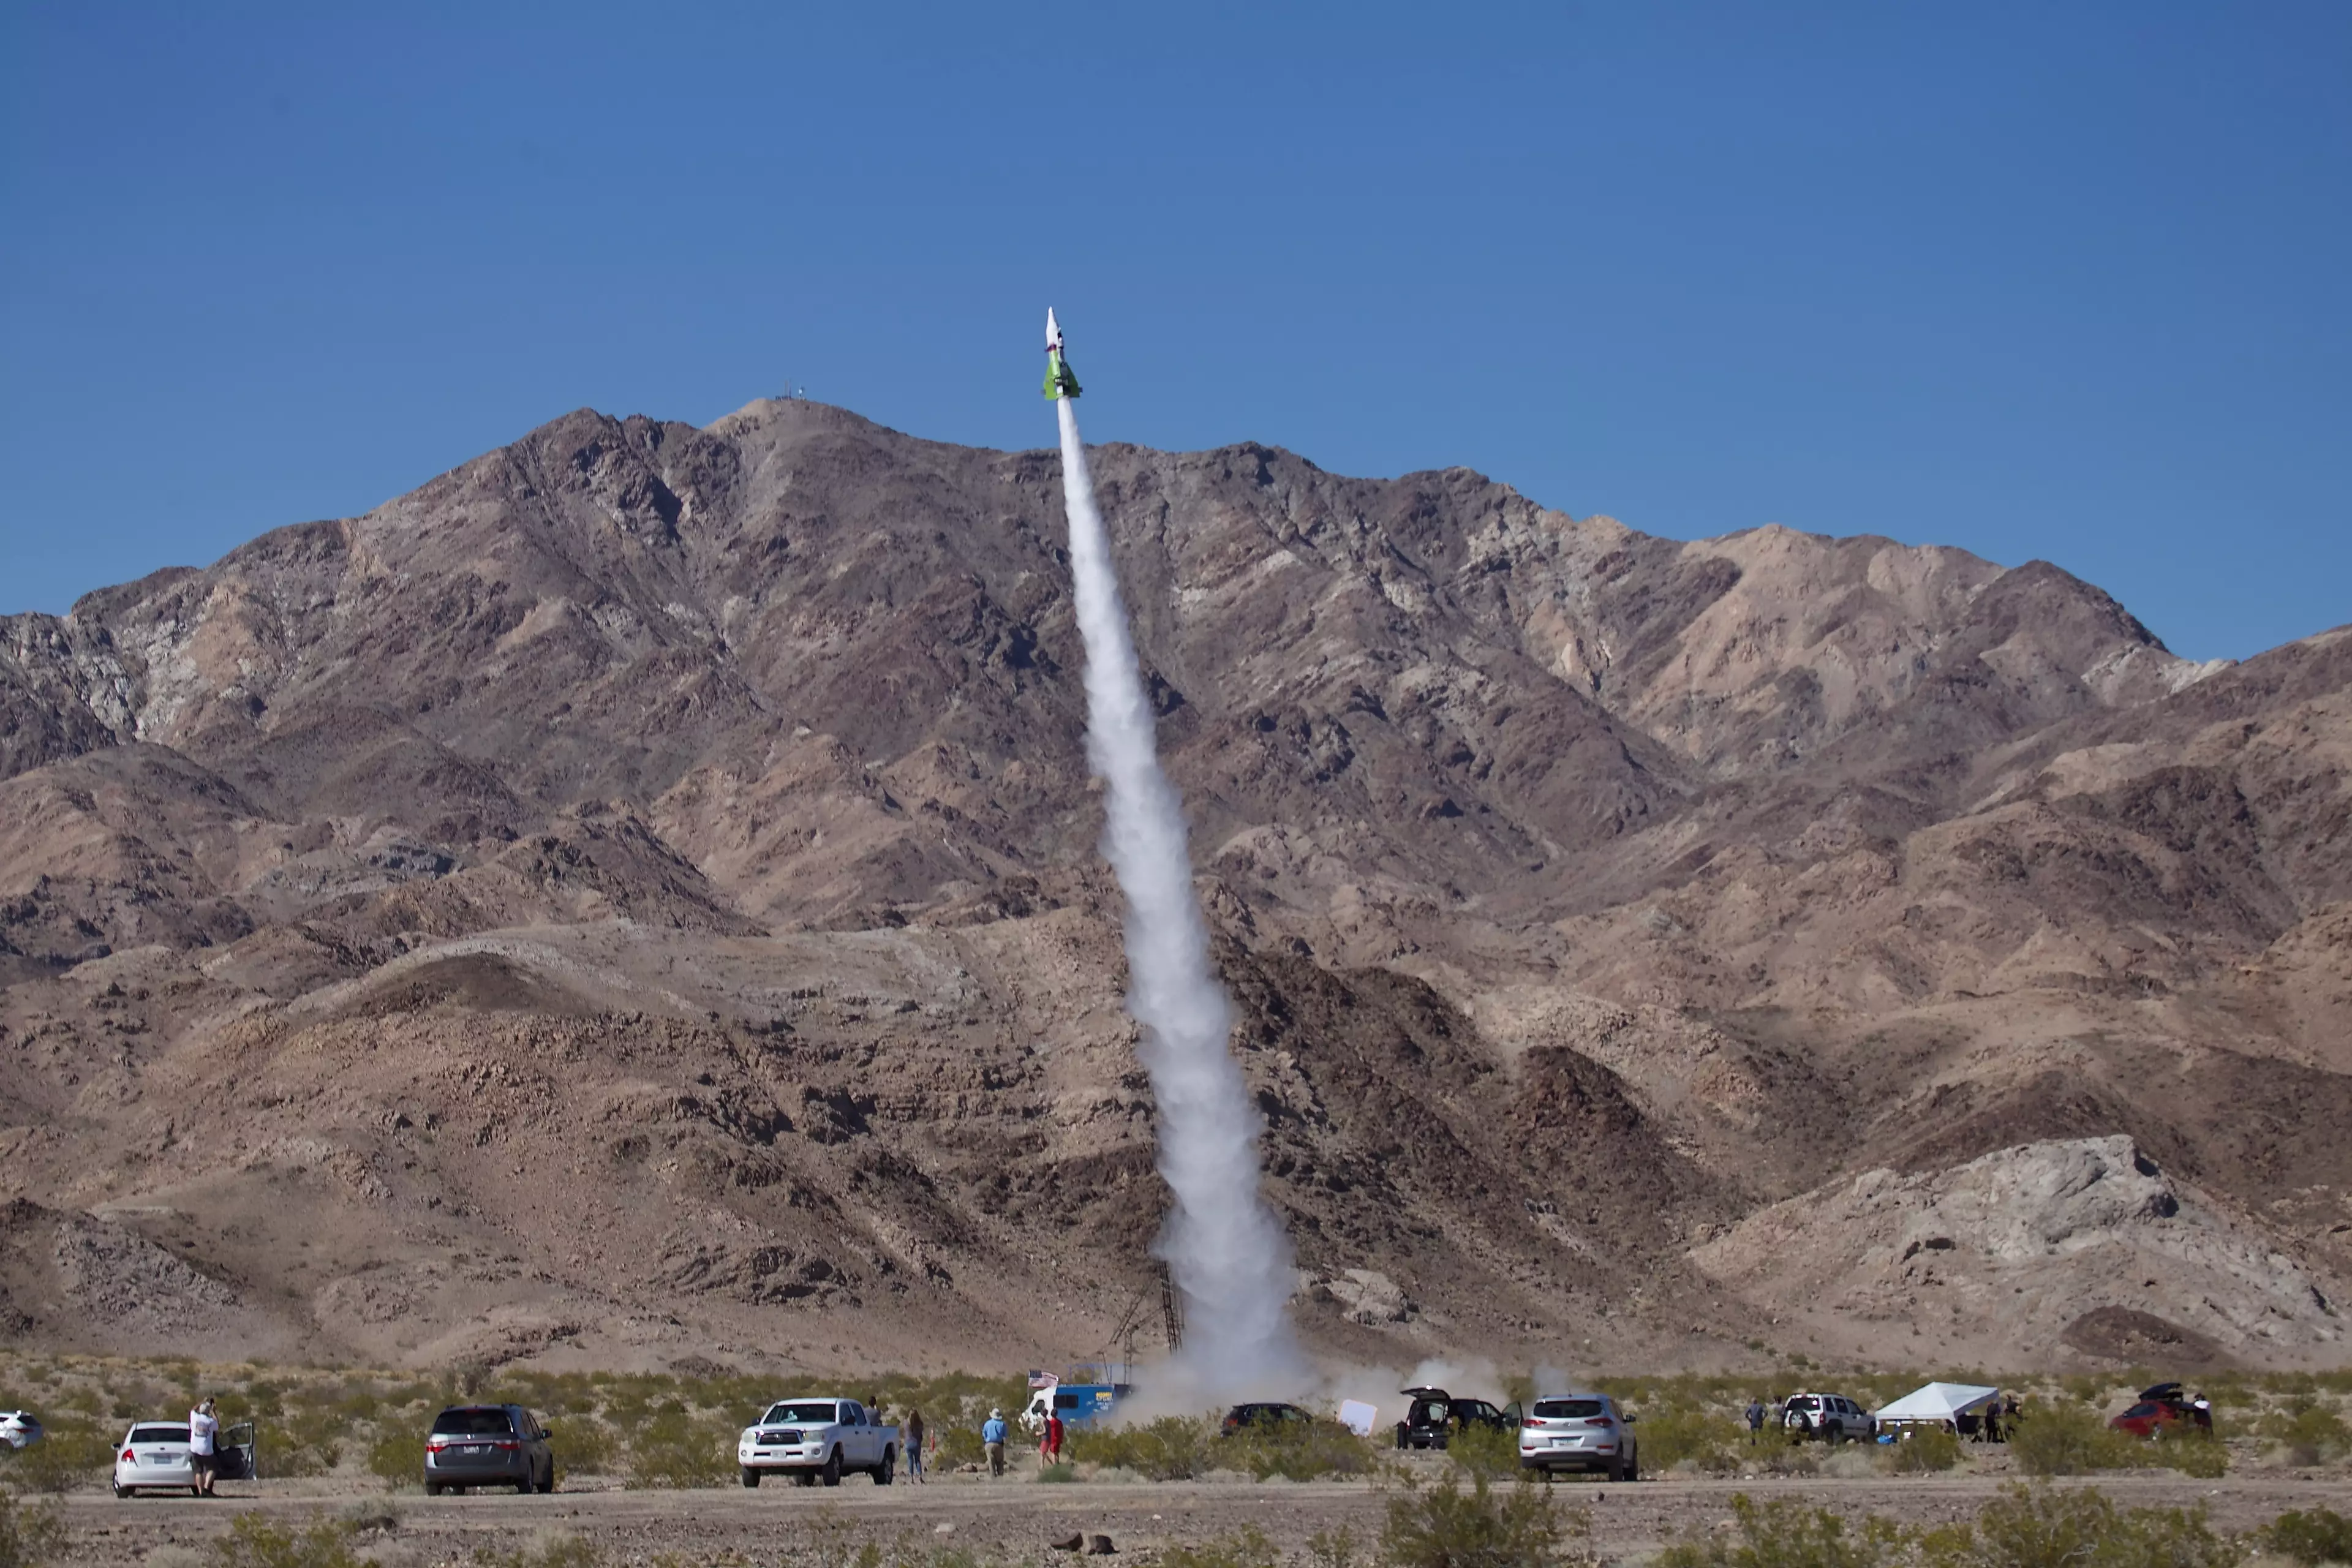 Flat Earther Finally Manages To Blast Off In Homemade Rocket Ship